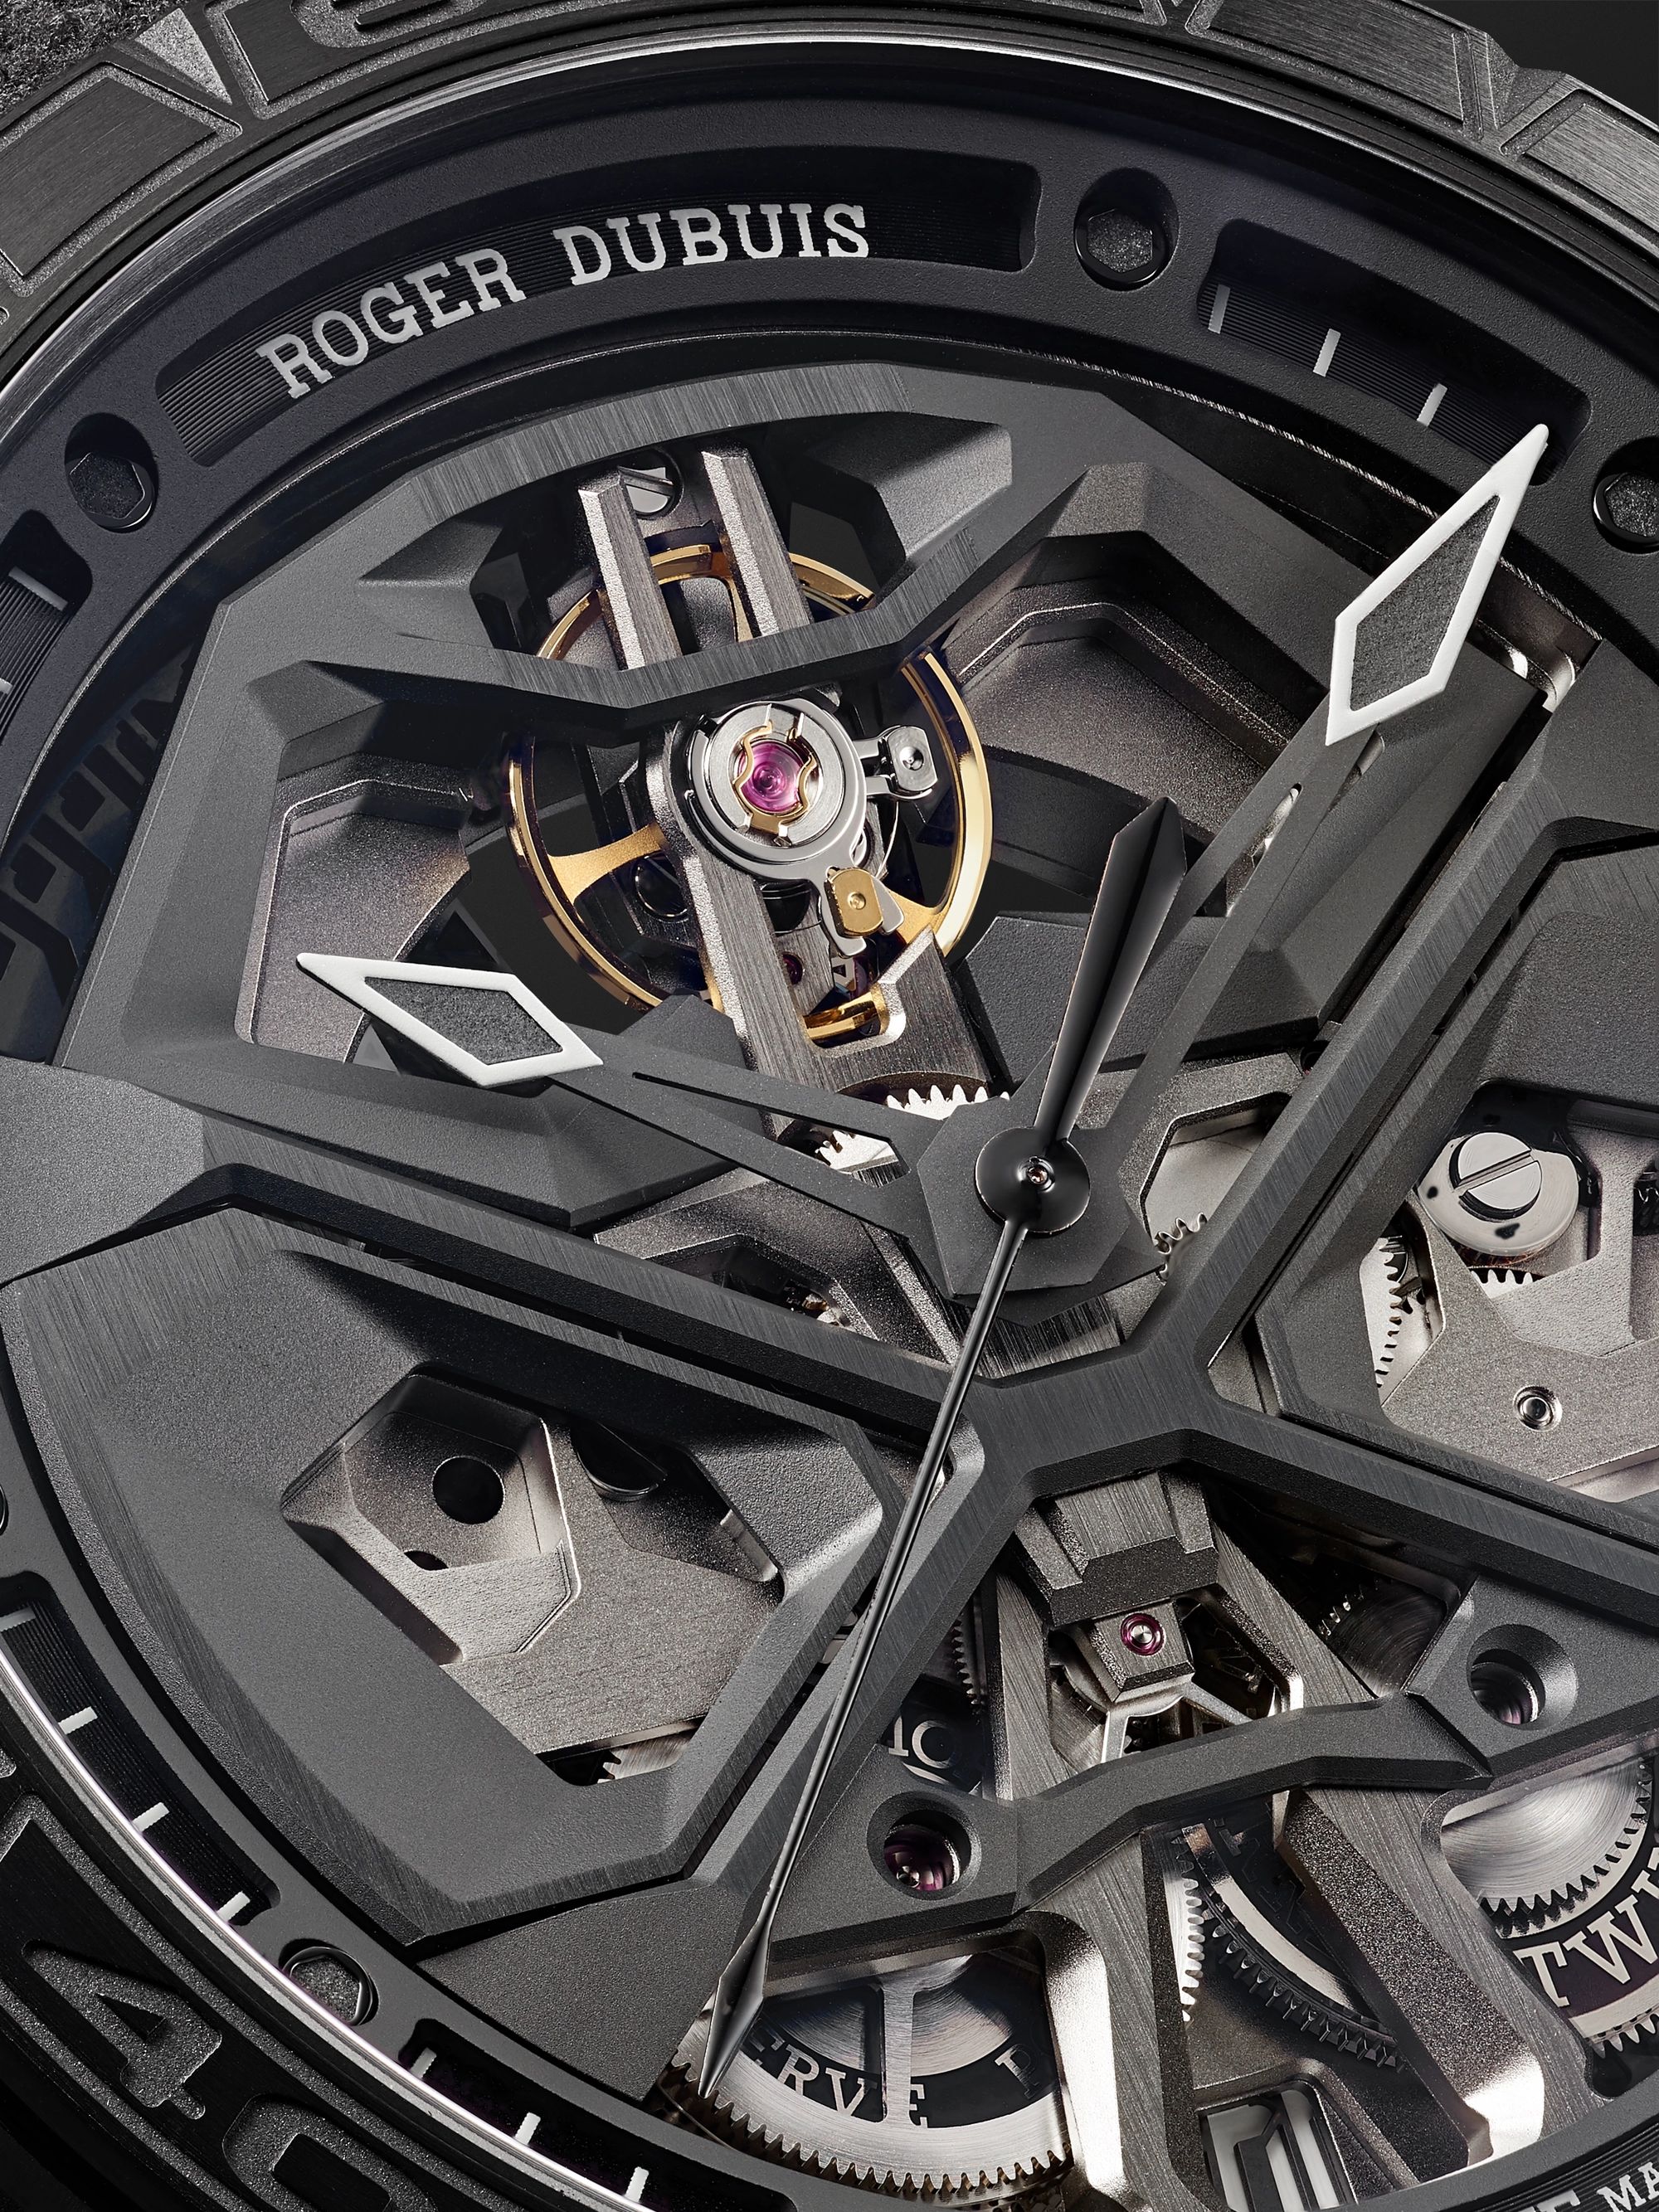 ROGER DUBUIS Excalibur Spider Huracán Black DLC Automatic 45mm Titanium and Rubber Watch, Ref. No. RDDBEX0829